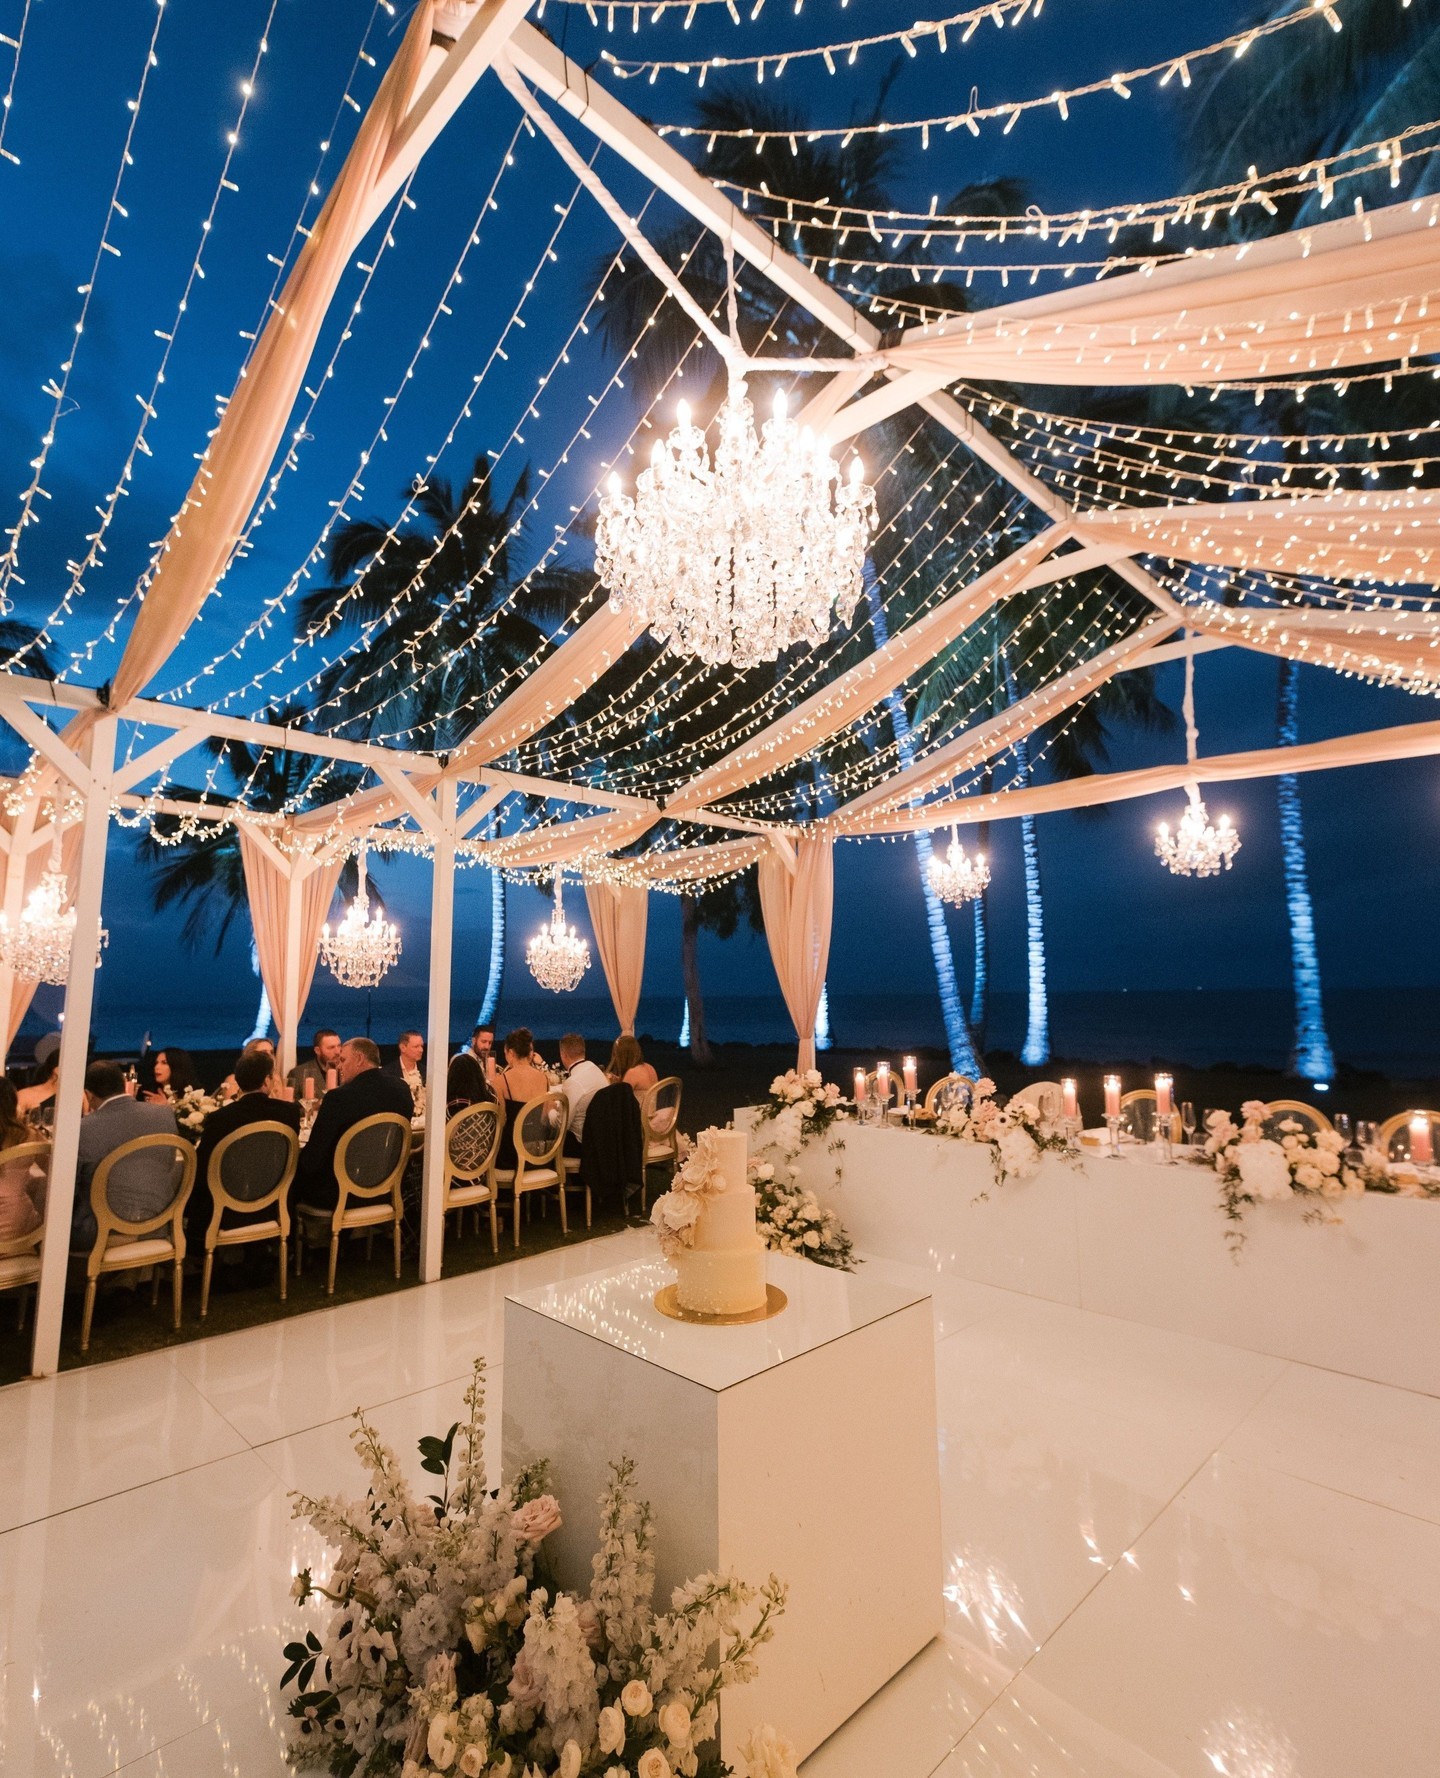 Expert Advice on Creating a Memorable Wedding Experience